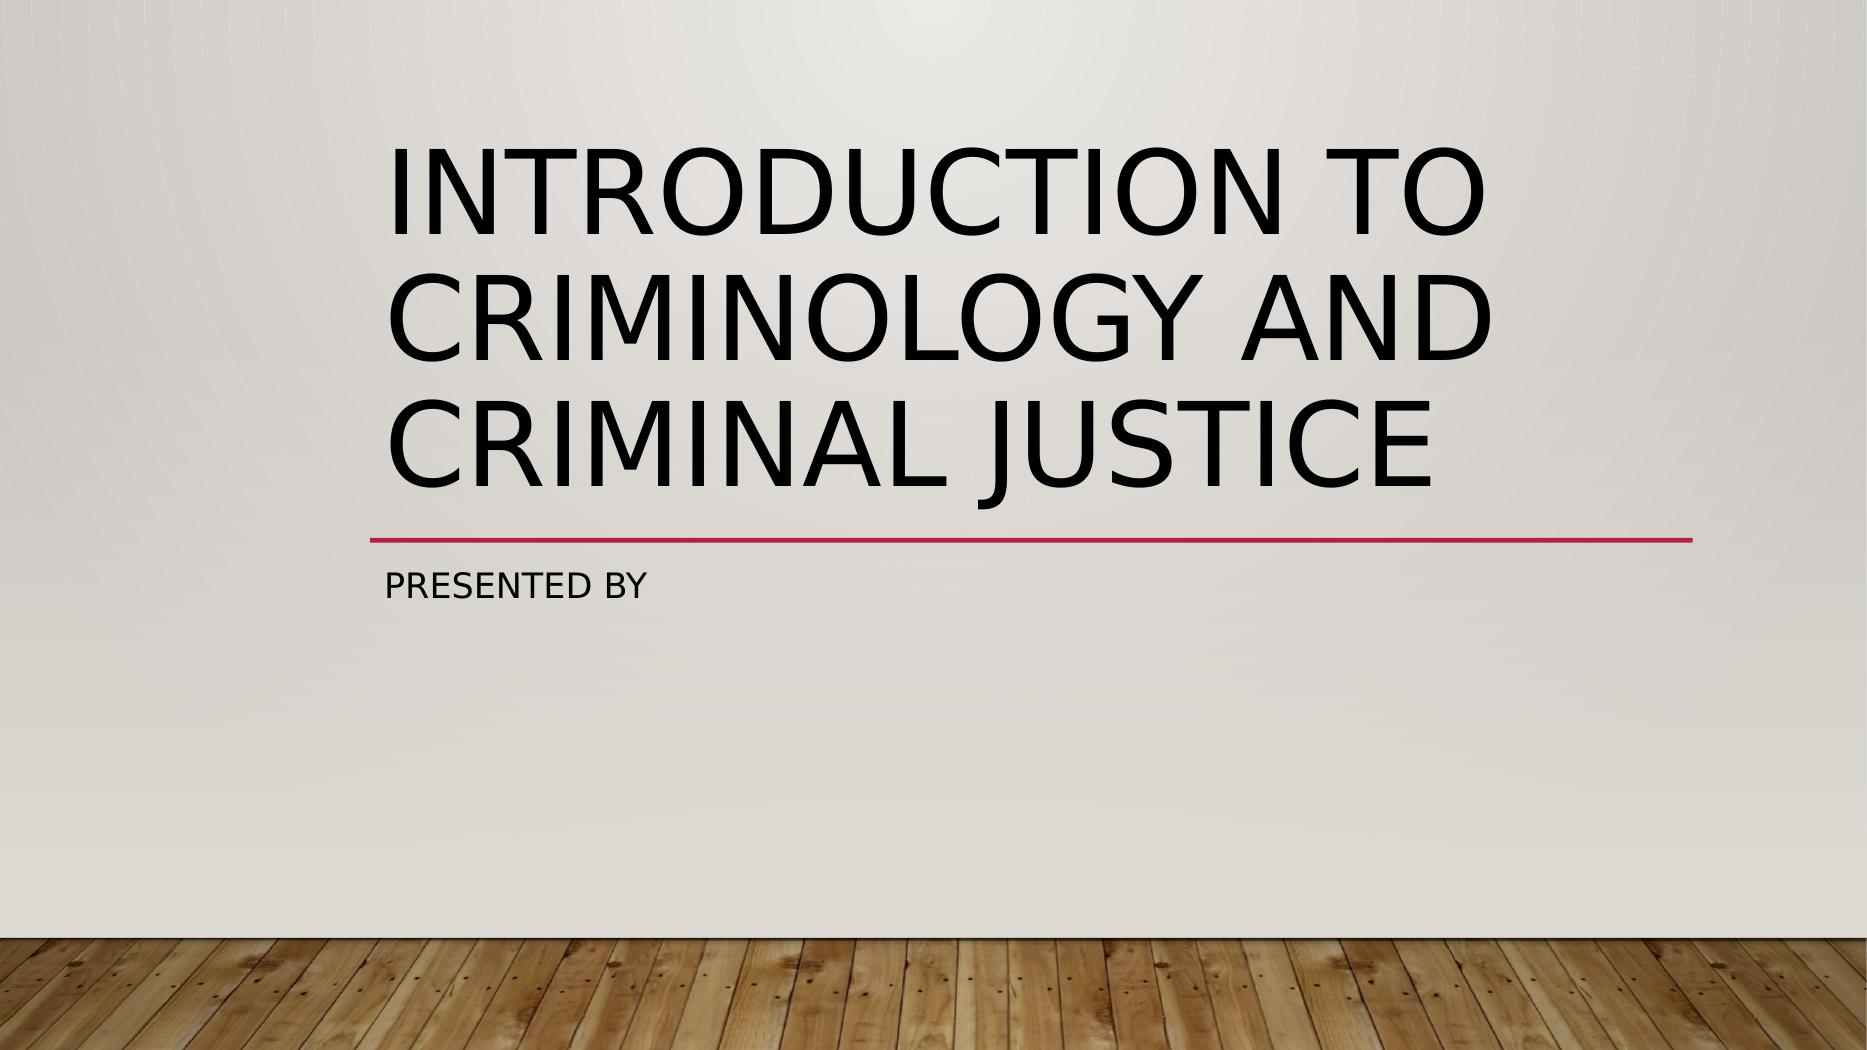 Introduction to Criminology and Criminal Justice Assessment 2022_1